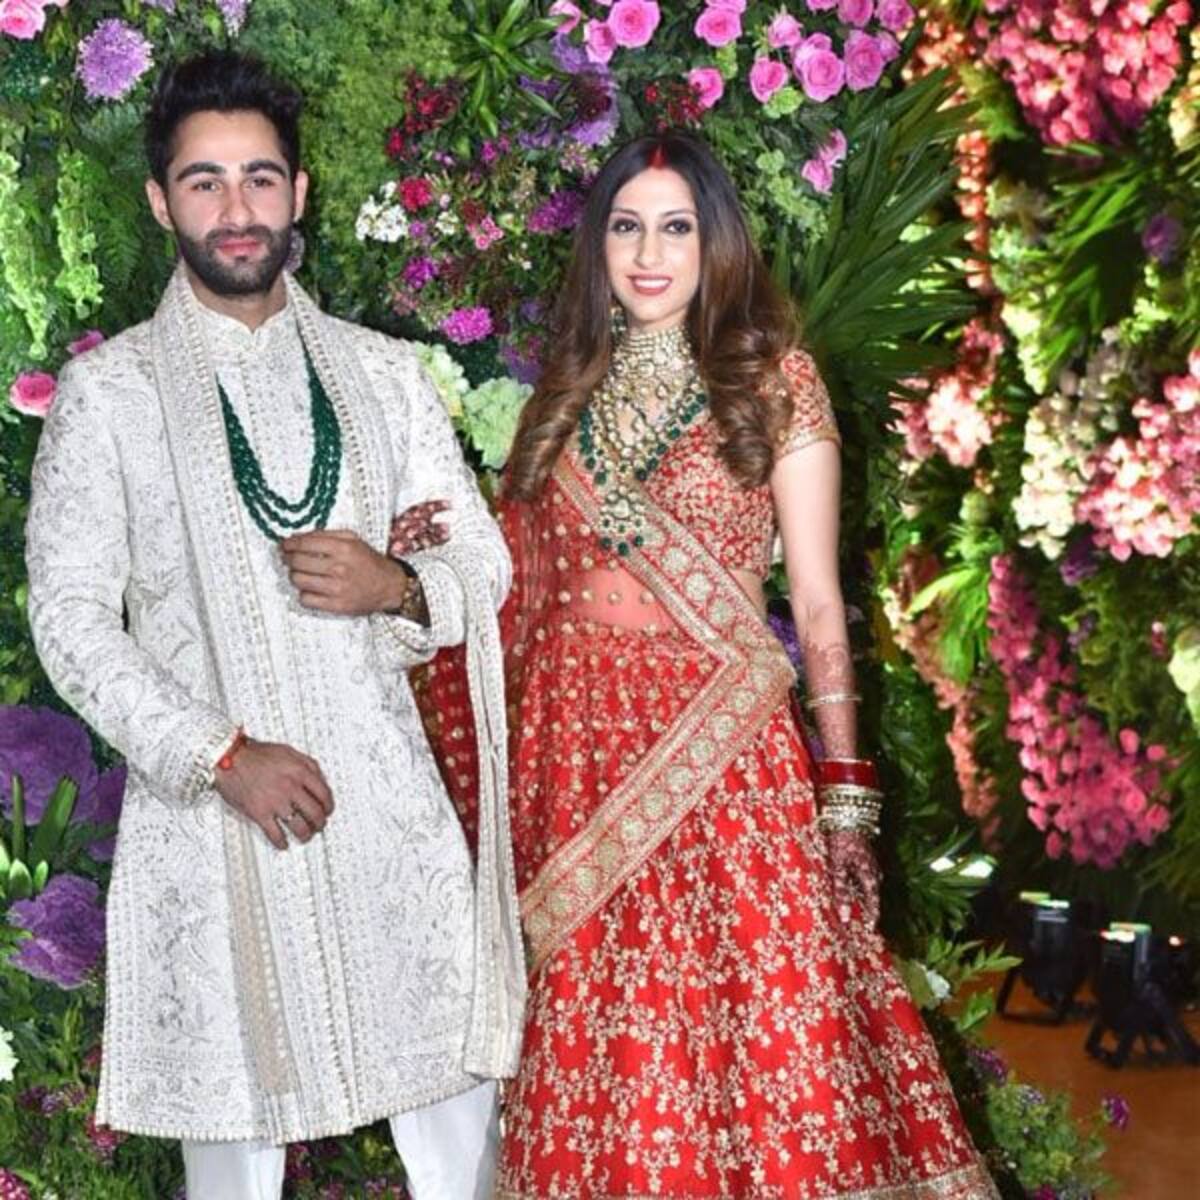 Armaan Jain And Anissa Malhotra S Wedding Reception The Bachchans The Khans And Other Bollywood Celebs Attend The Grand Event Checkout photos & videos of armaan jain. armaan jain and anissa malhotra s